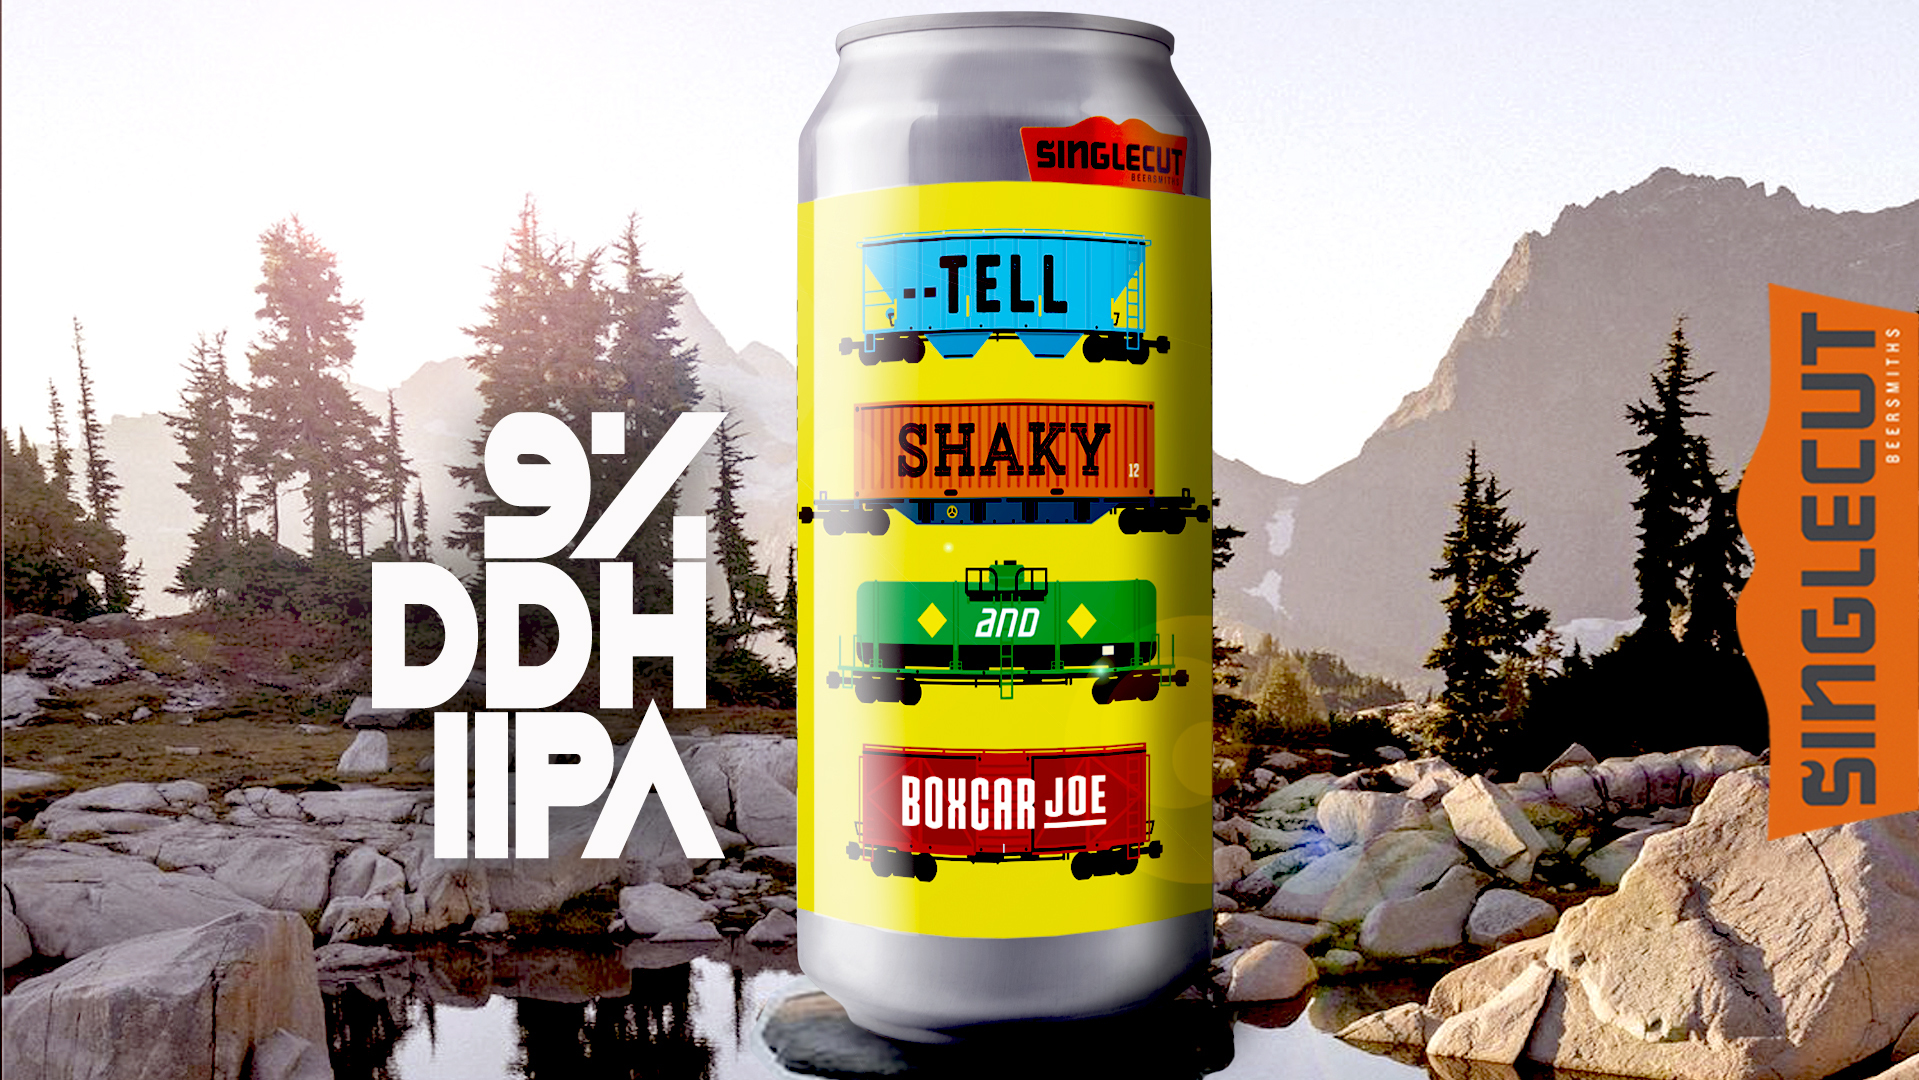 a can of beer sitting on a rock on a mountain stream. the can's label says "Tell Shaky and Boxcar Joe" and there's additional text on the image that says "9% DDH IIPA"